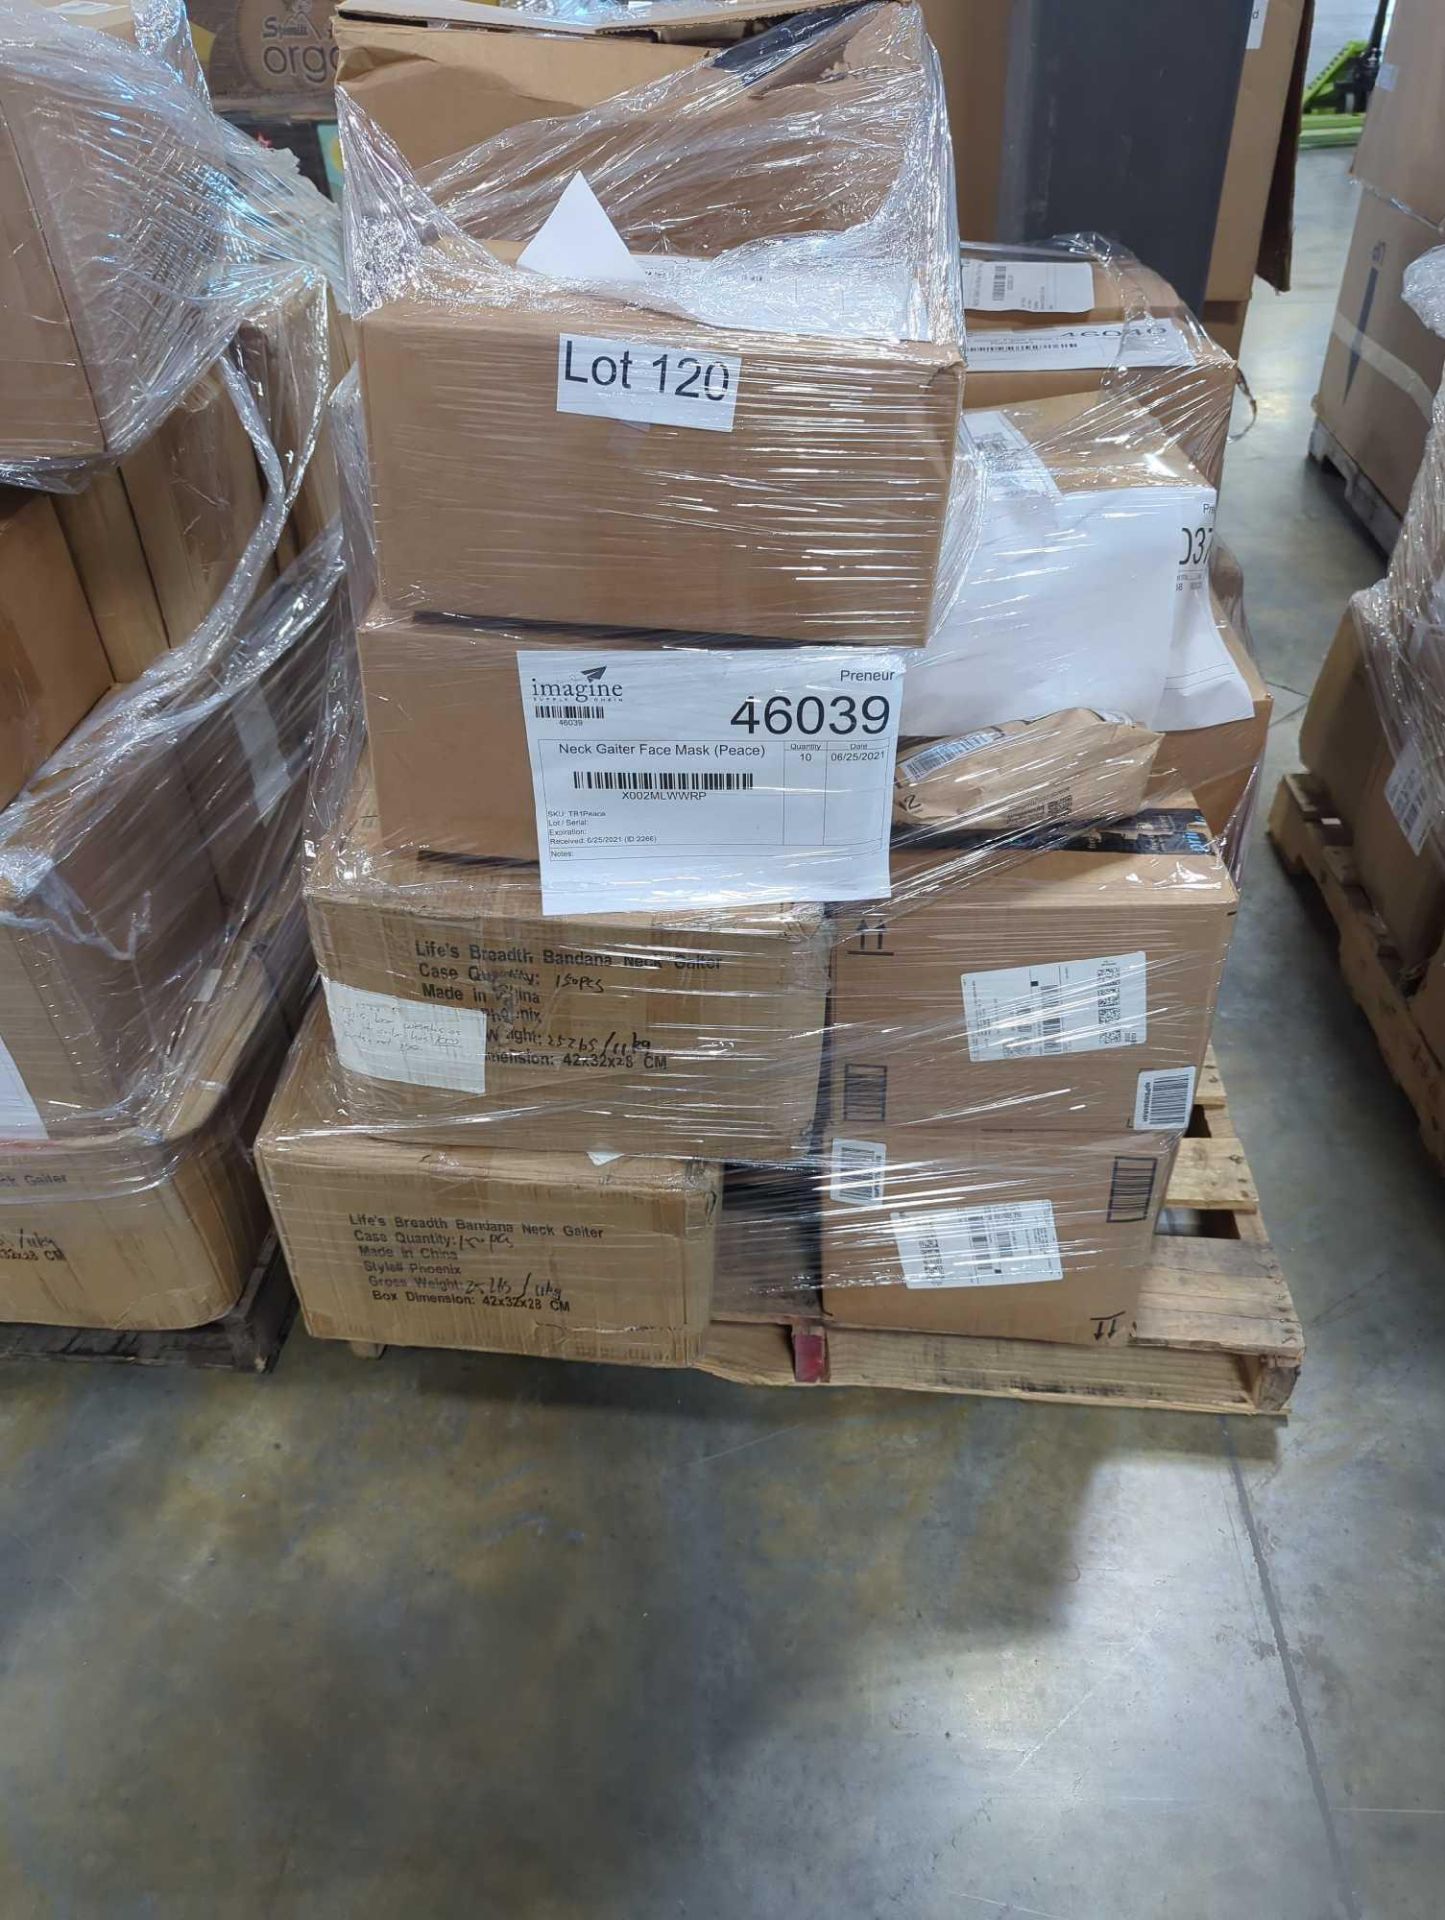 pallet of life's breadth neck gaiters and face masks - Image 2 of 8